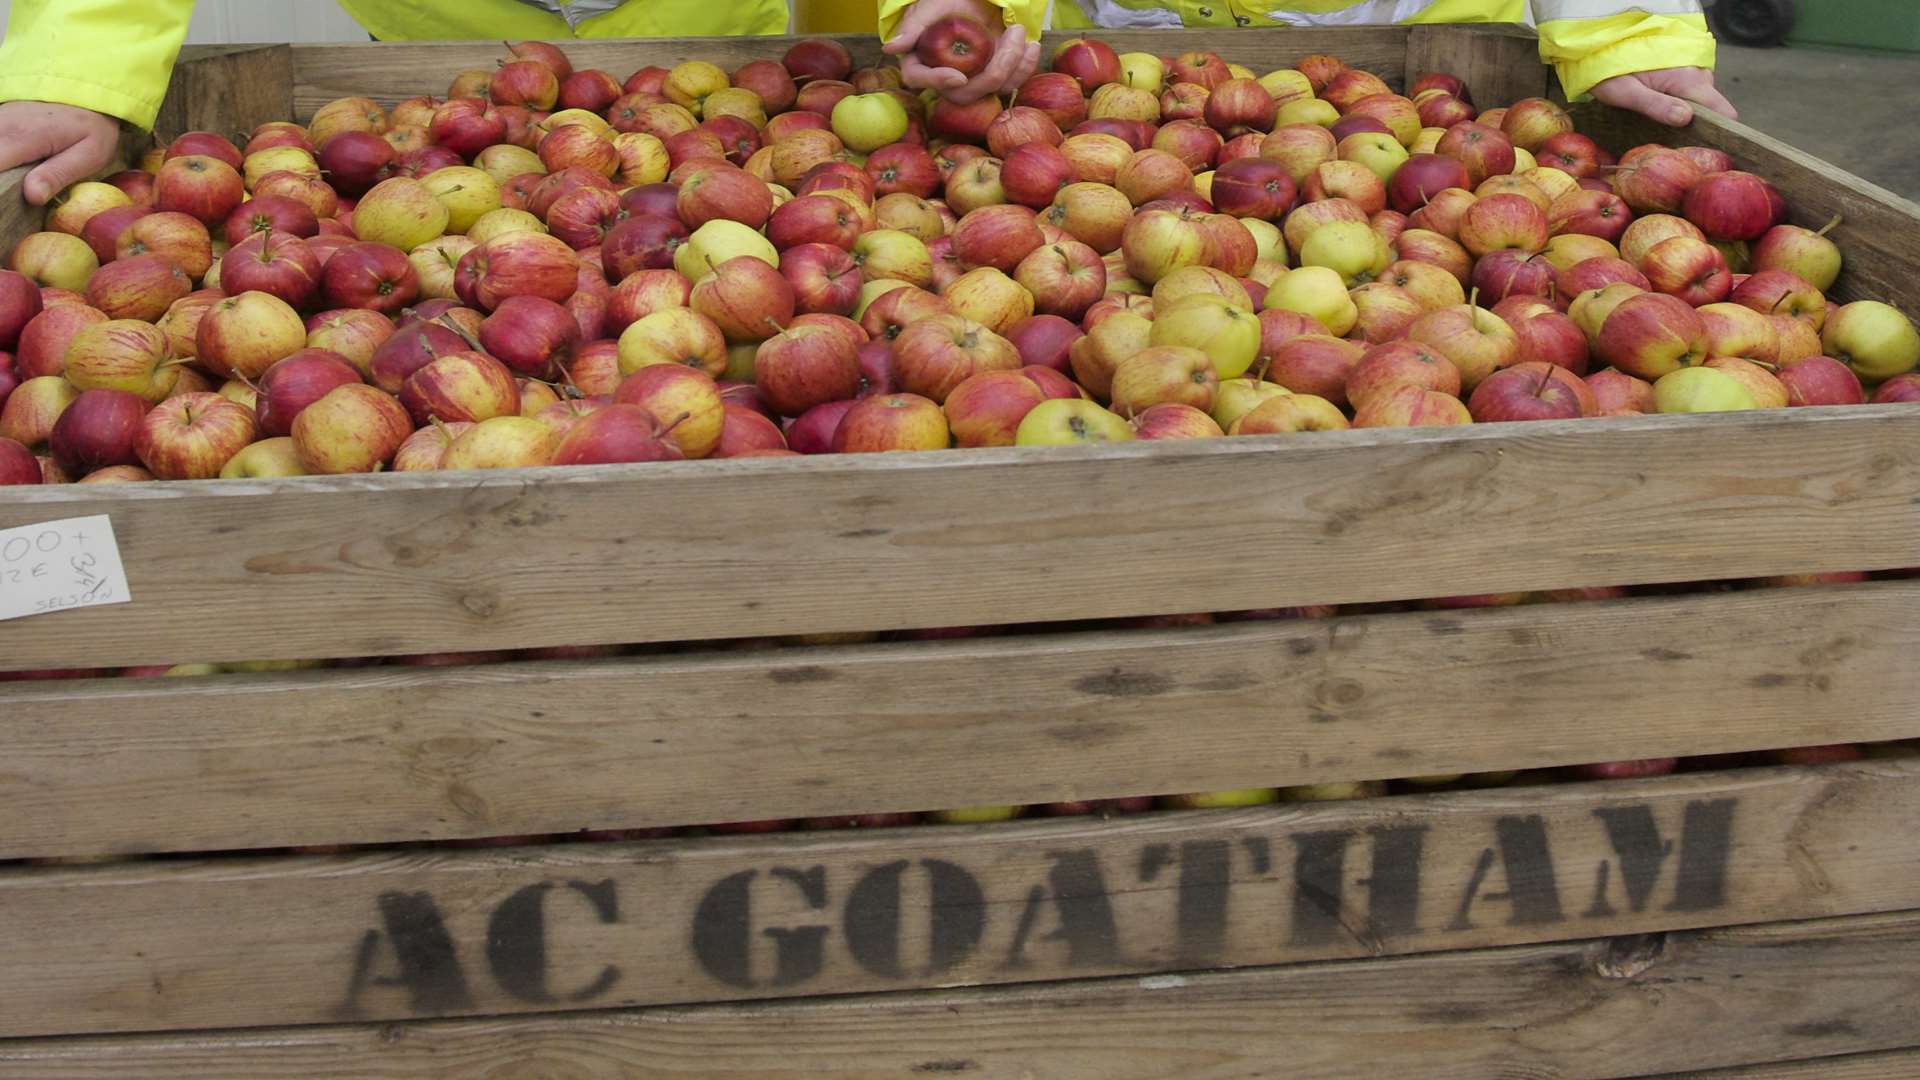 AC Goatham produces more than one in five of the apples eaten in the UK